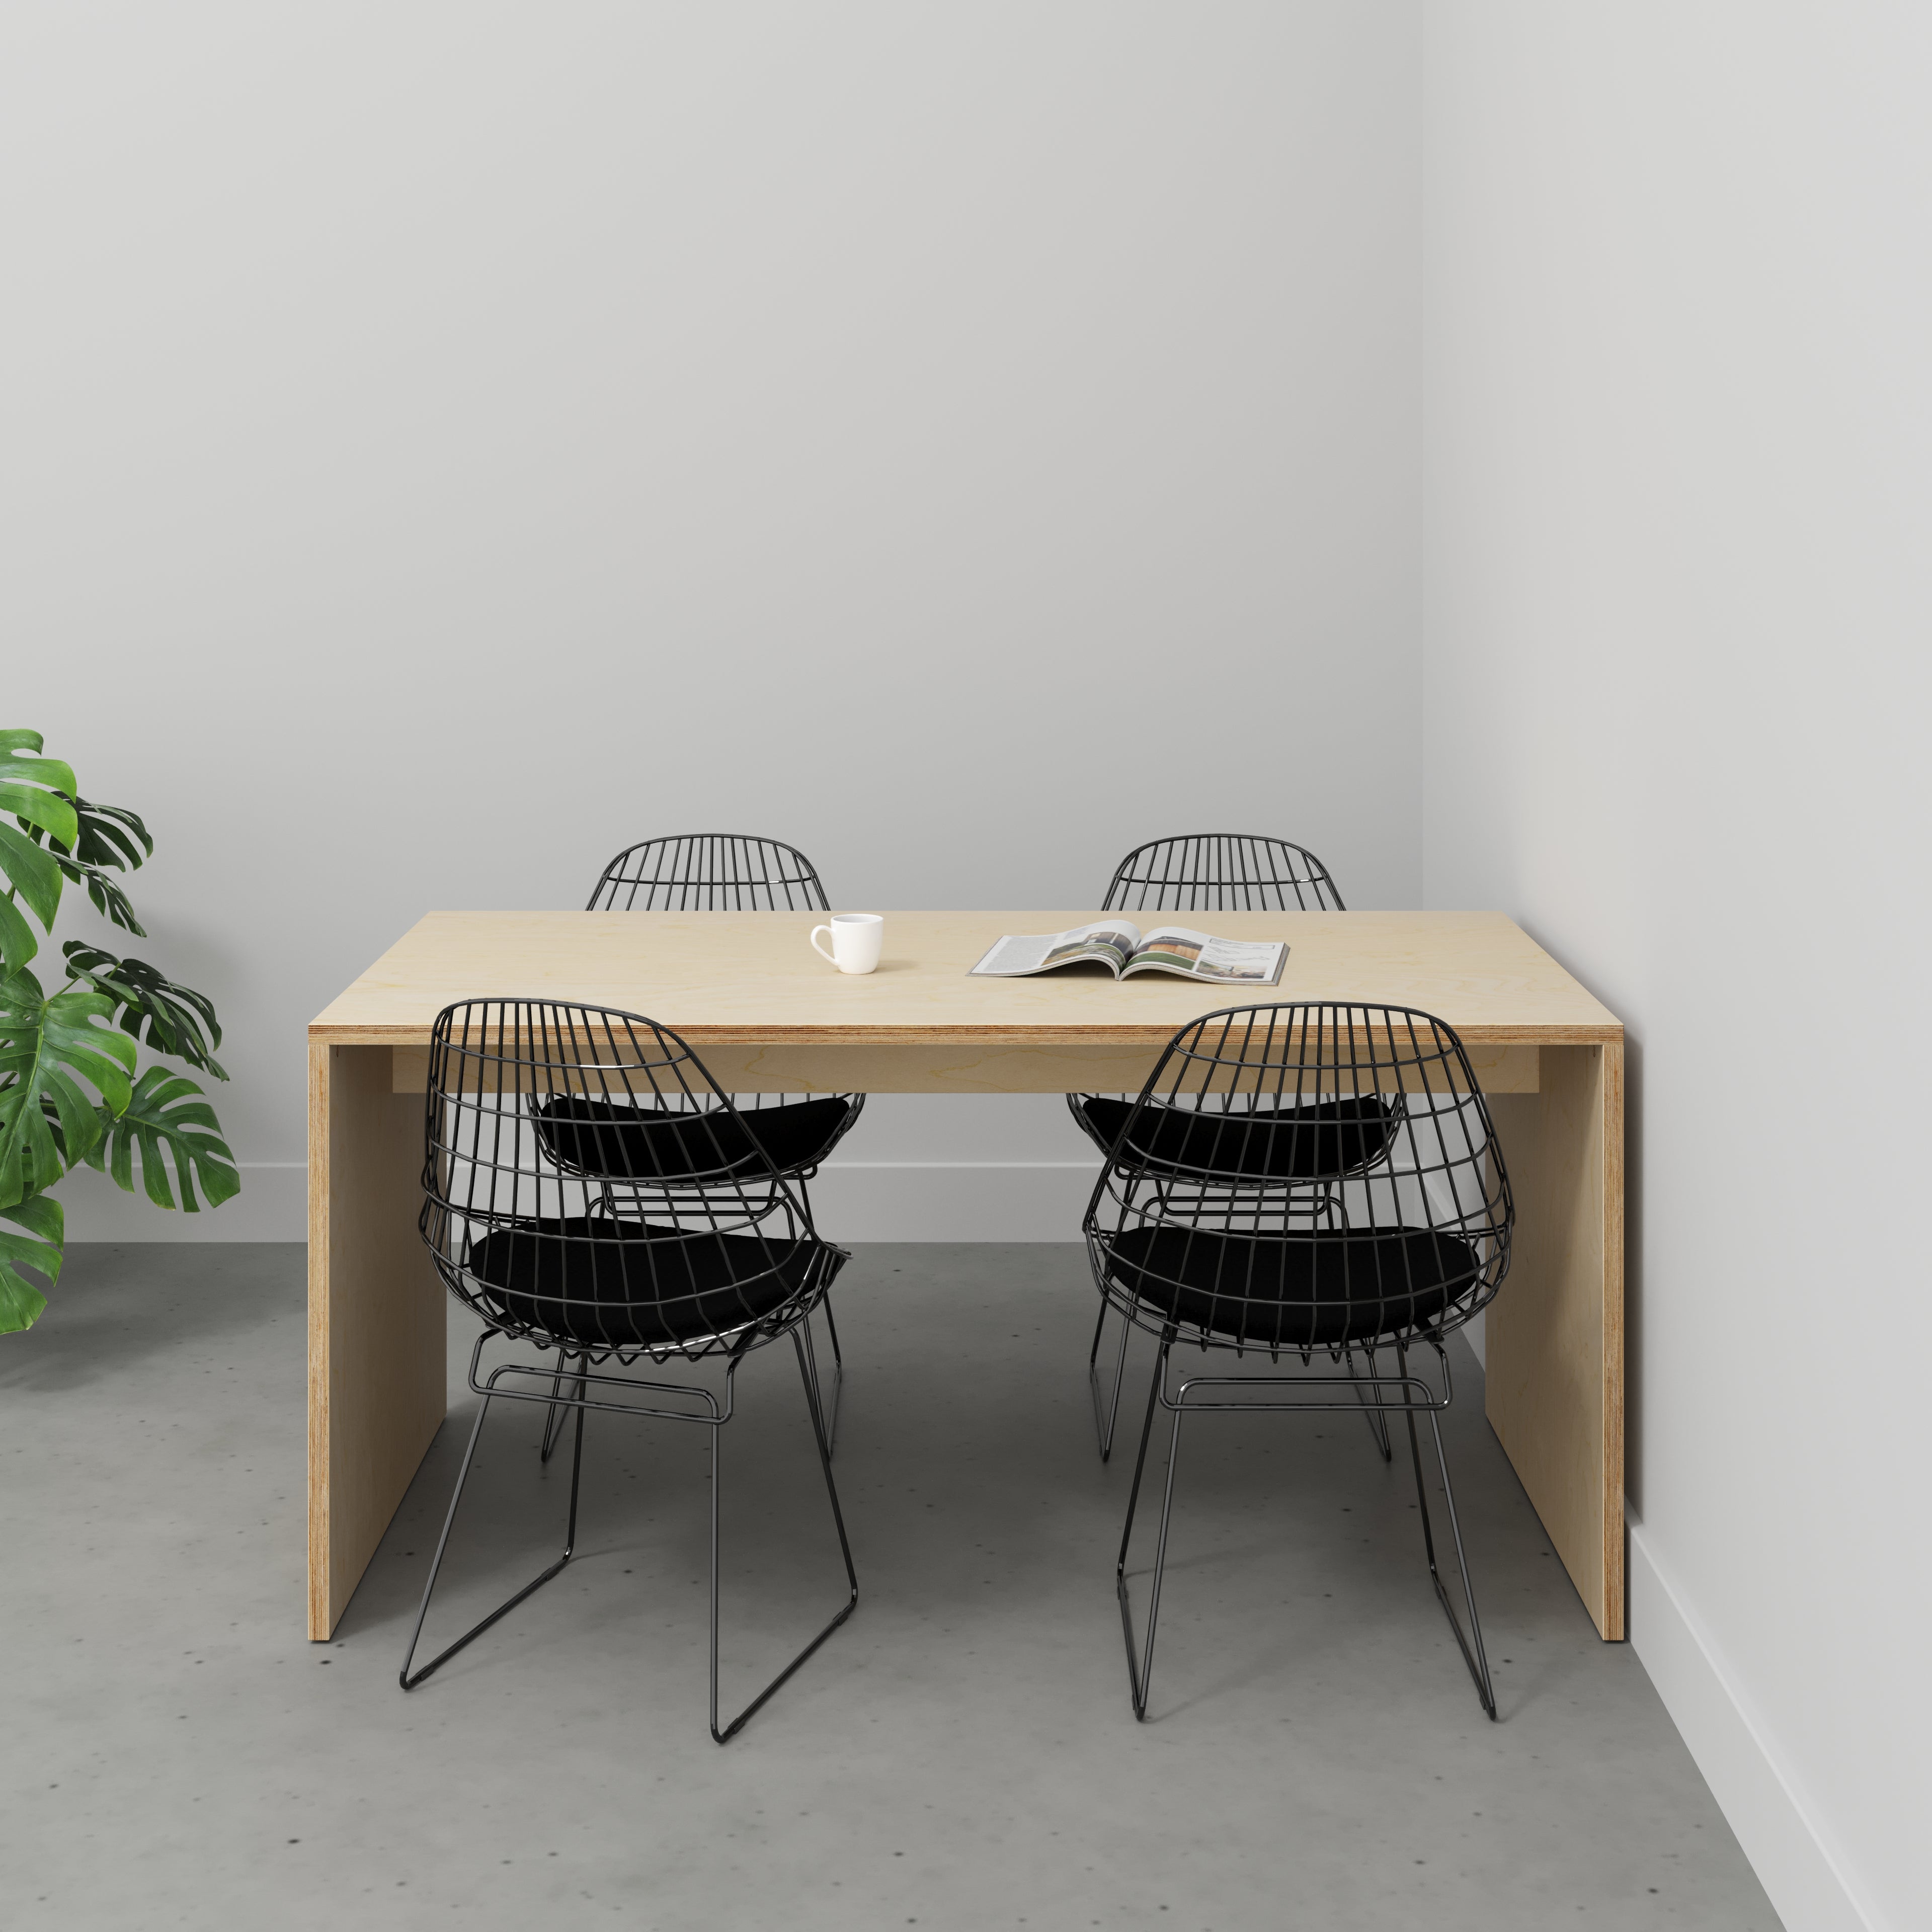 Table with Solid Sides - Plywood Birch - 1600(w) x 800(d) x 750(h)